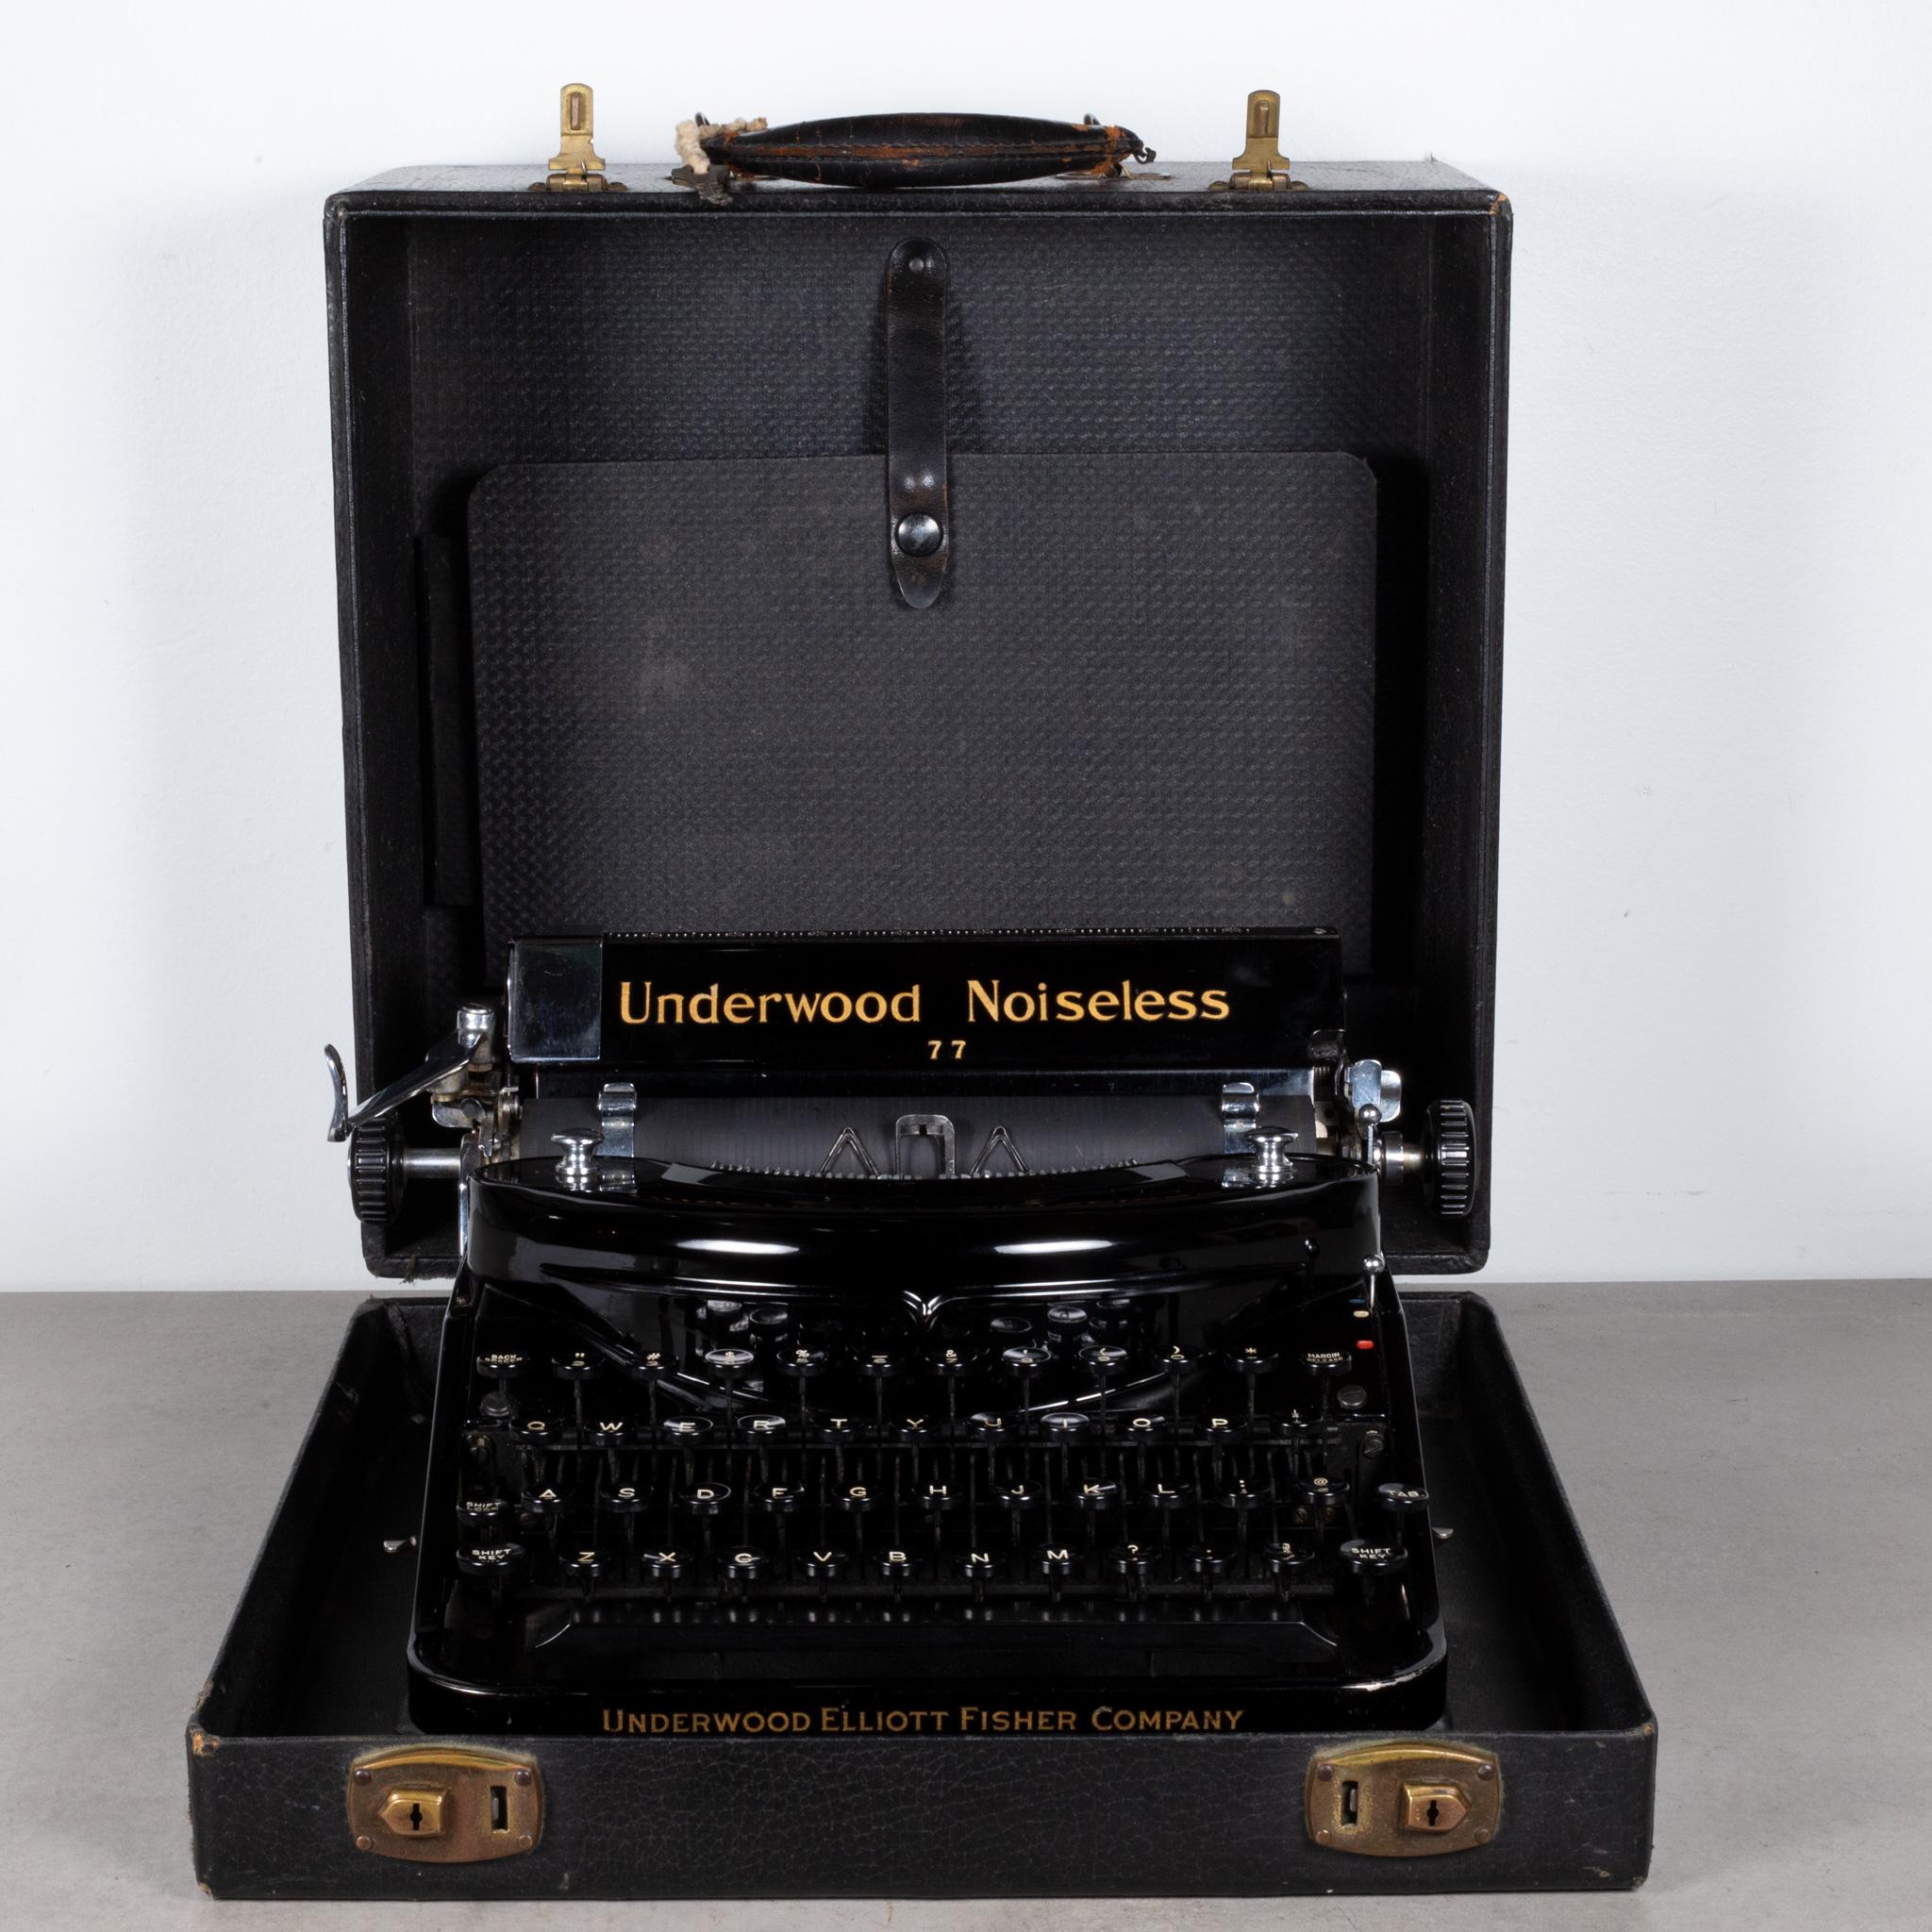 ABOUT

An original portable Art Deco Underwood Noiseless 77 typewriter in high gloss black finish and original leather case with key. Black and white keys. Original gold lettering. This typewriter is very clean and in good working order. It has